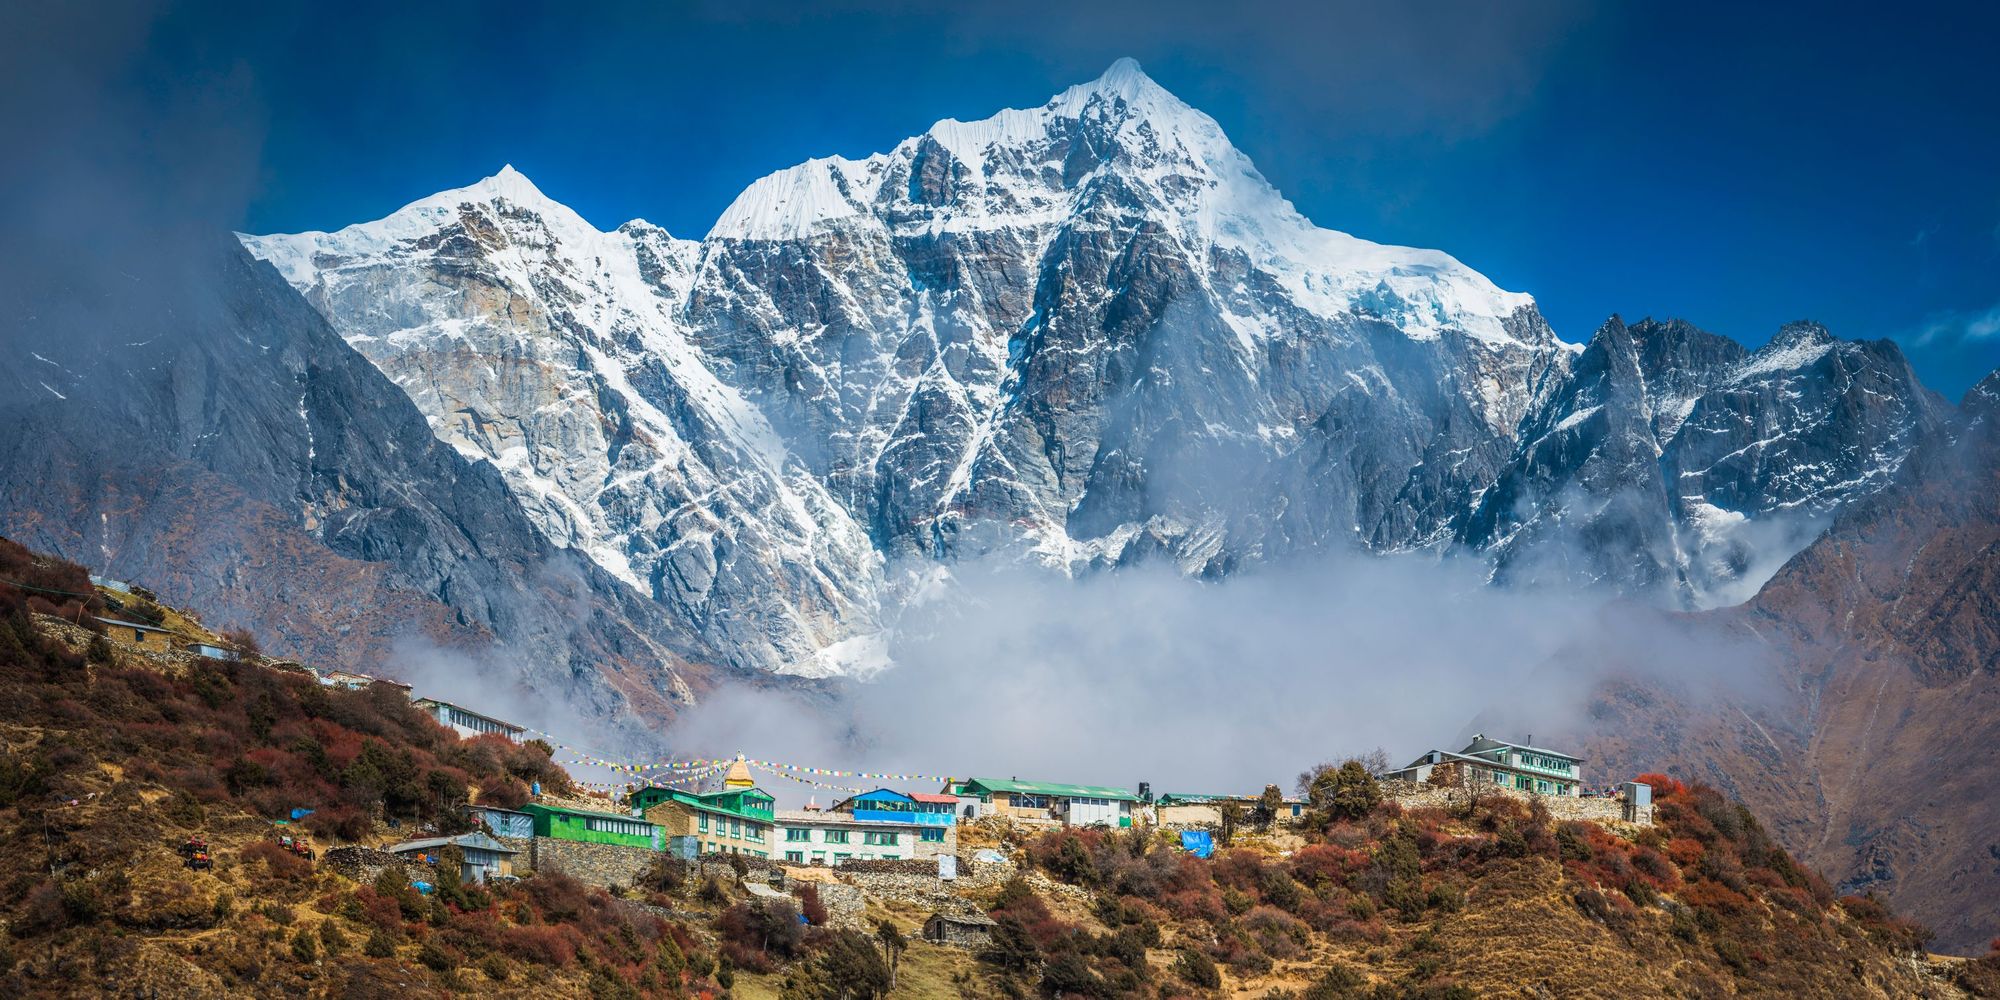 The magnificent snow-capped peak of Tawoche (6542m) towering over the Khumbu valley and teahouse lodges high on the Everest Base Camp trail. Photo: Getty